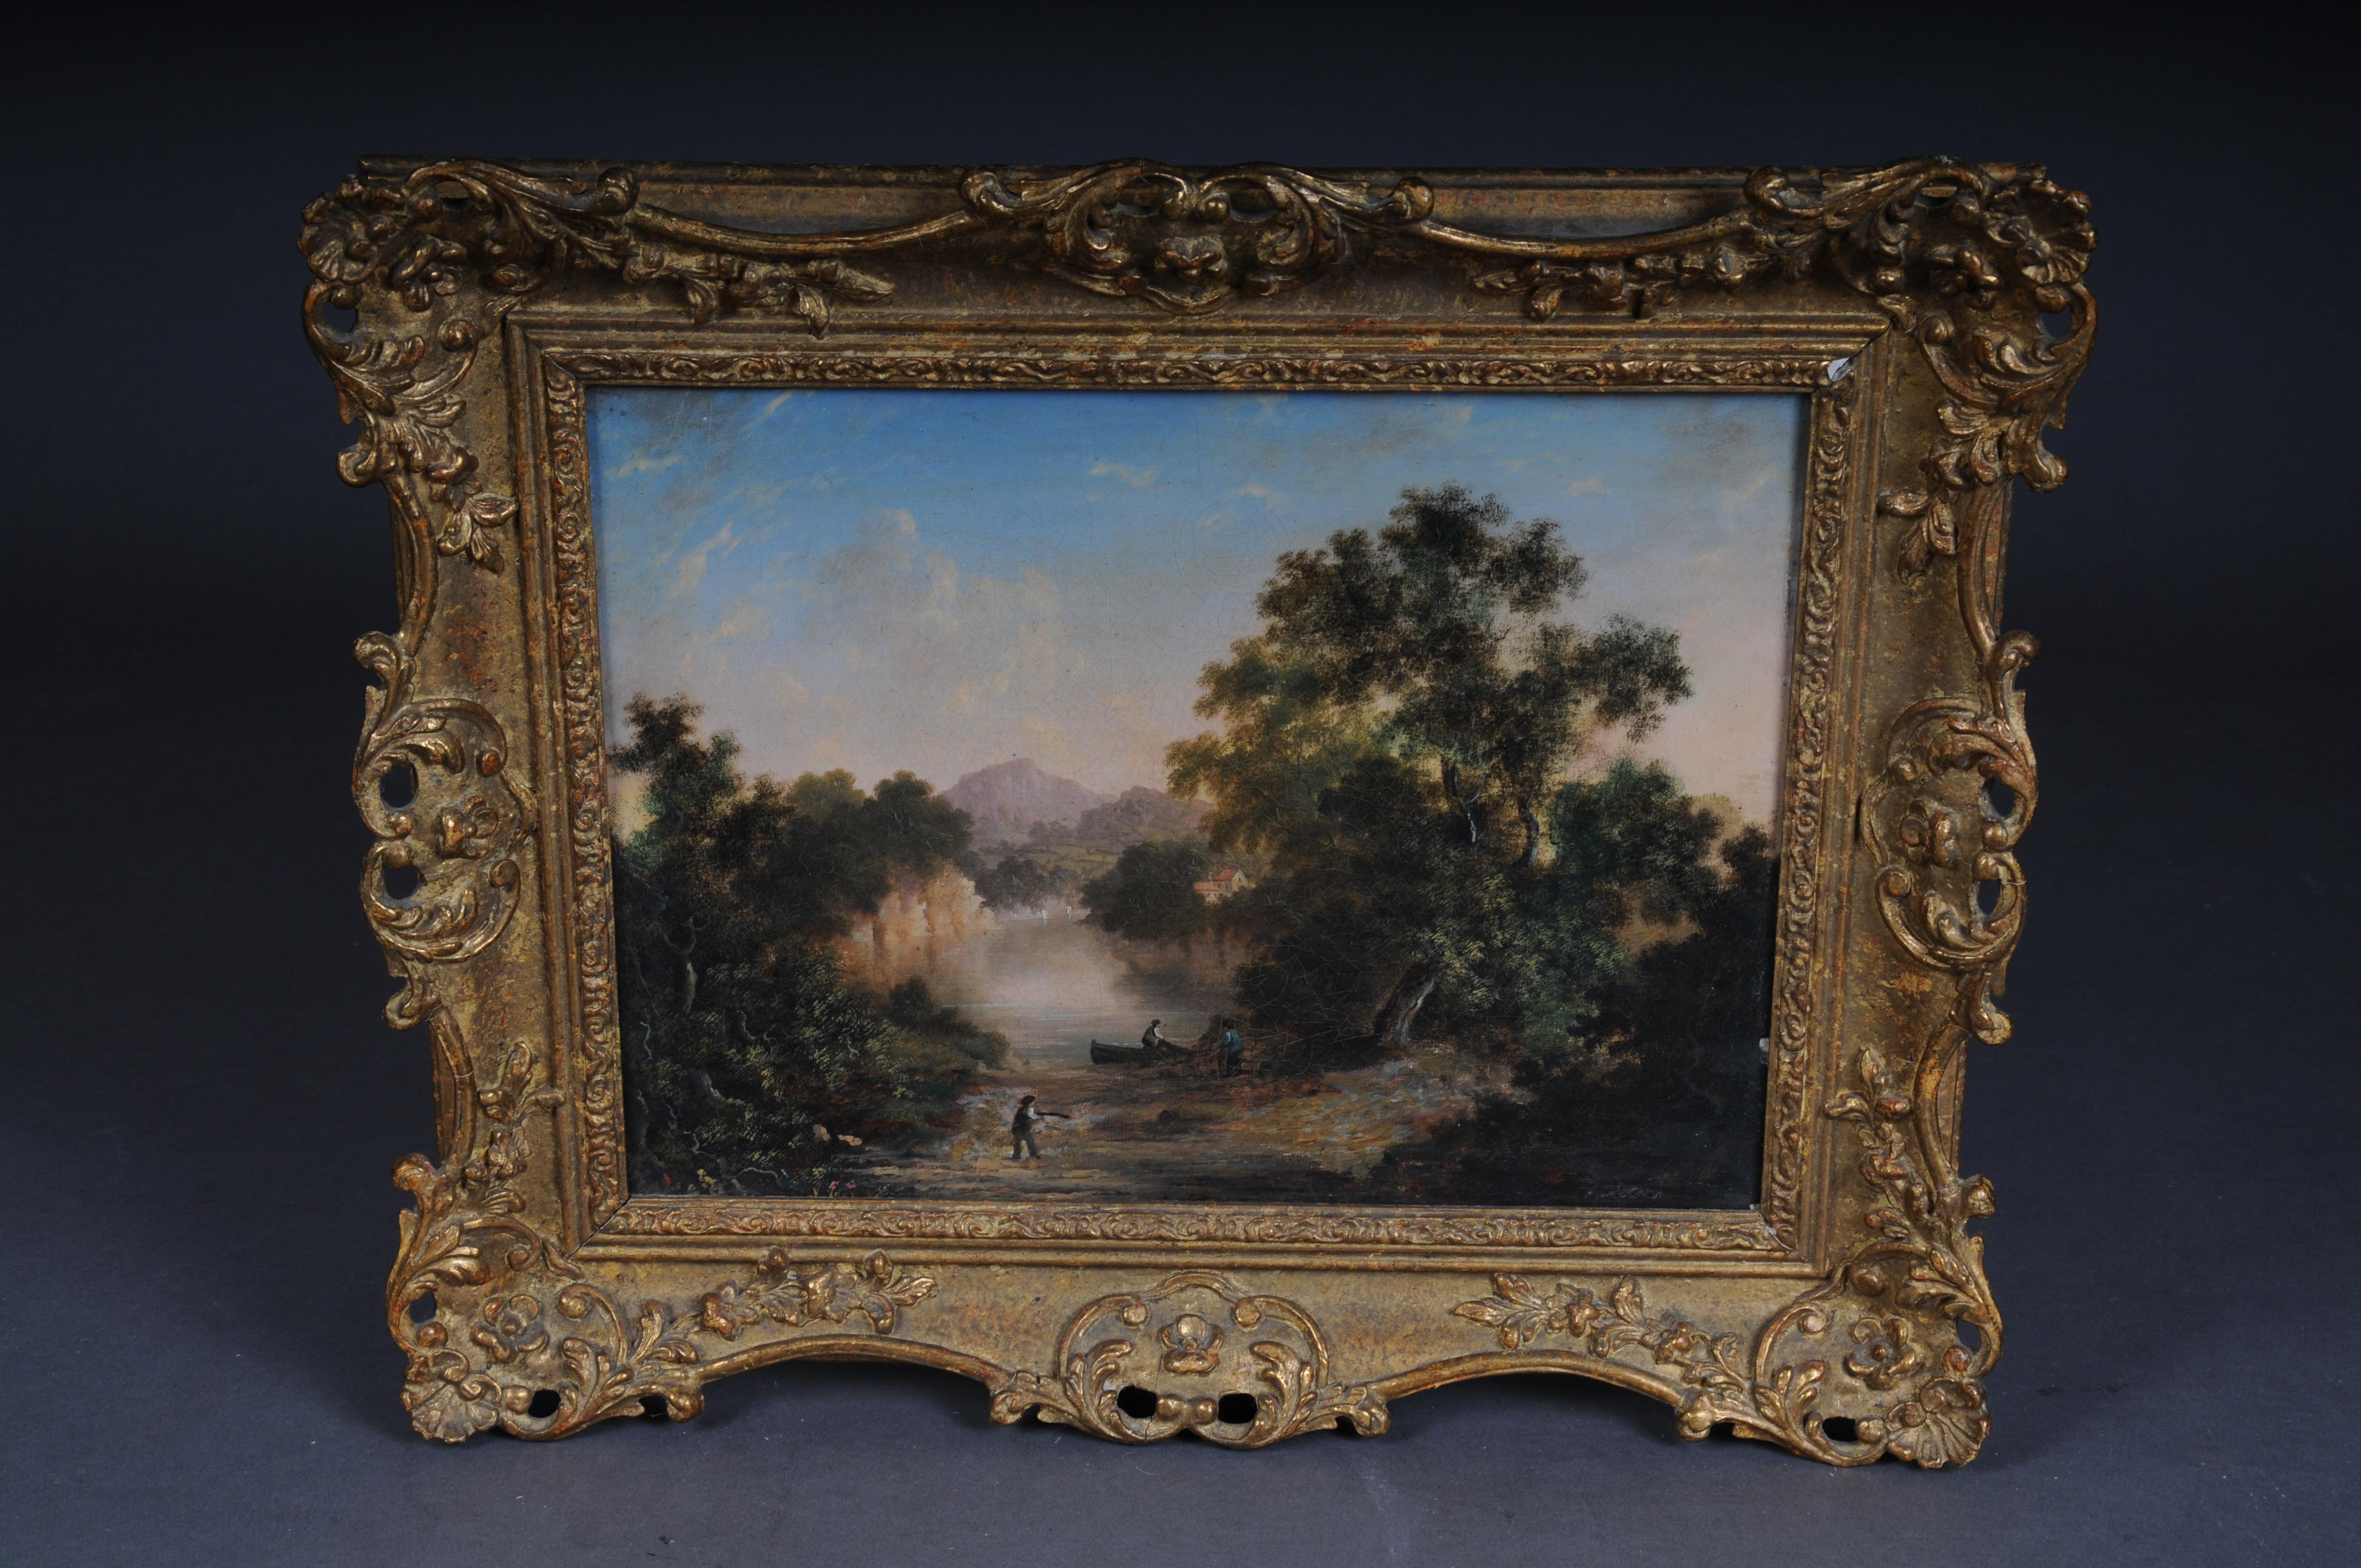 Antique oil painting romance landscape painting. 19th century

Oil on canvas. Romantic scene landscape painting under a clear blue sky. Oil on canvas early 19th century.

Painting framed with an ornate and gilded wooden frame. Very decorative.